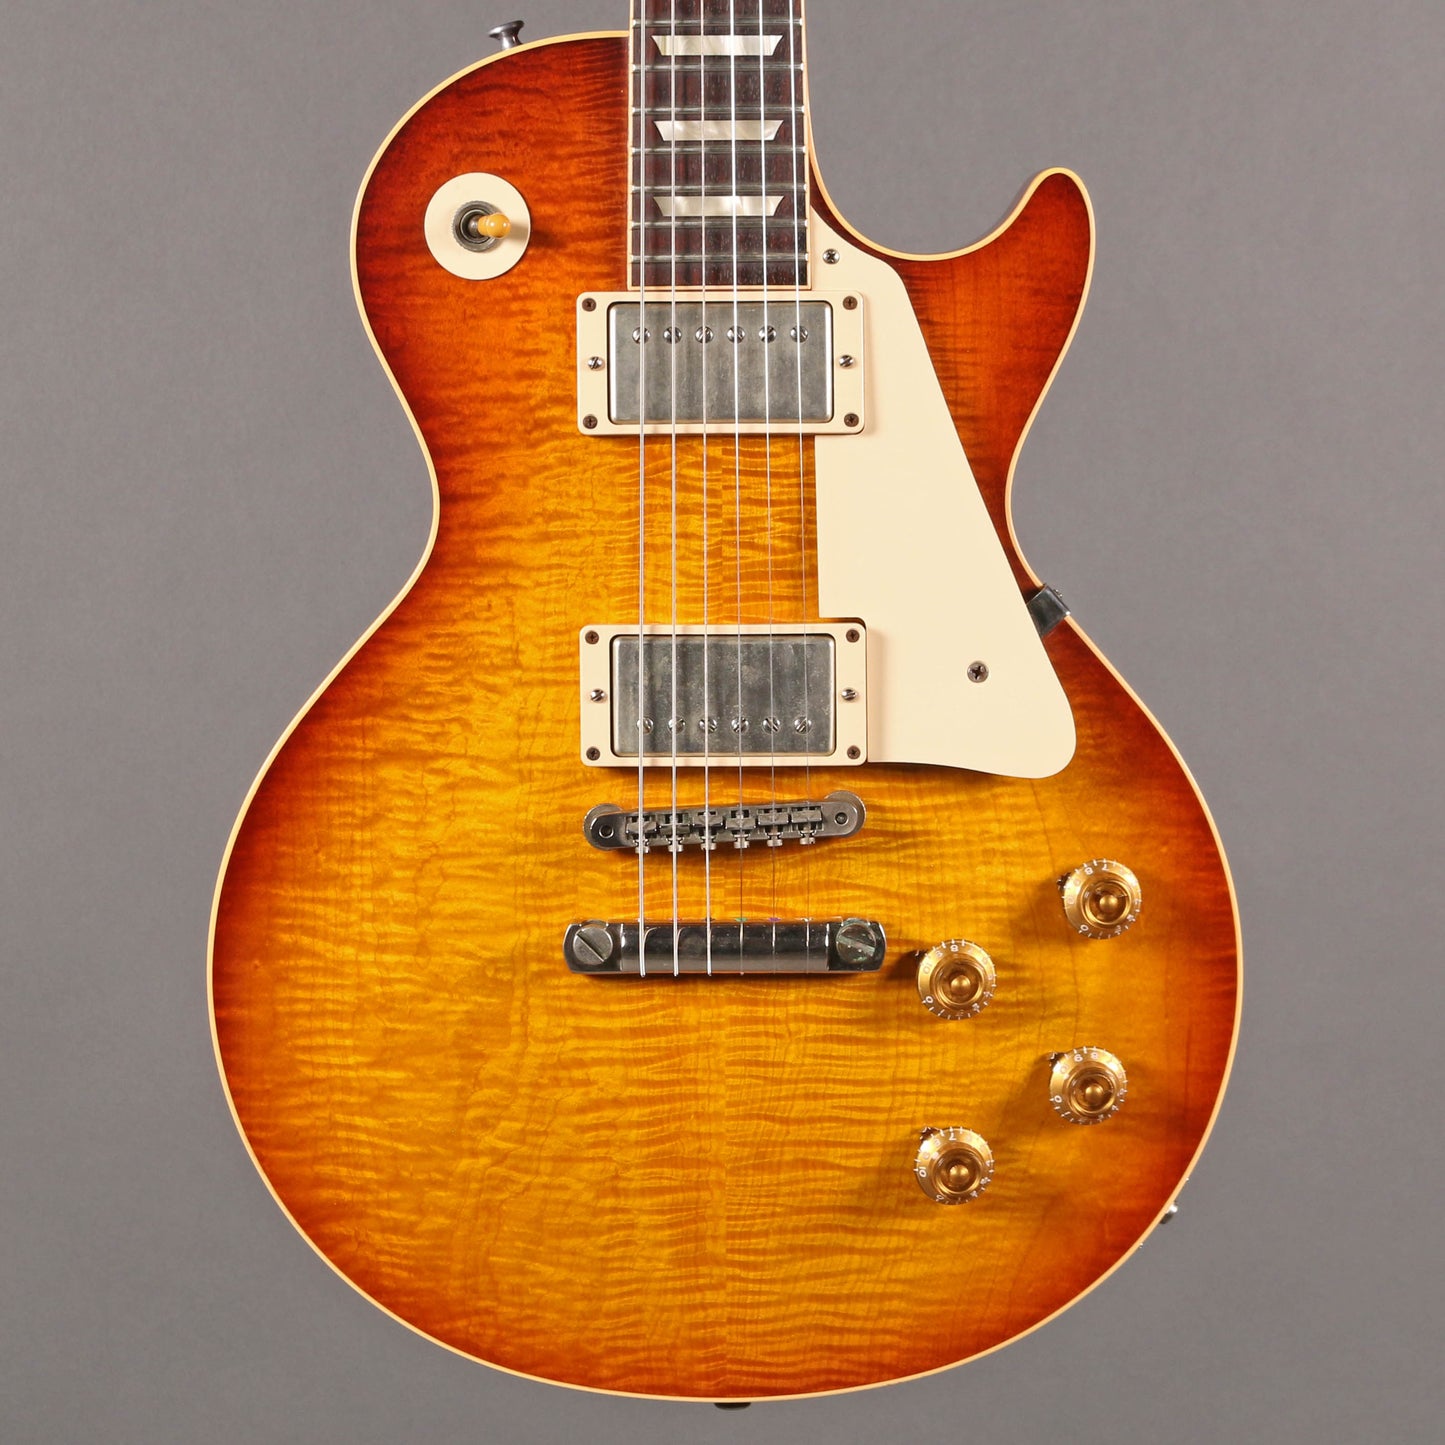 2009 Gibson Custom Billy Gibbons “Pearly Gates” Les Paul VOS